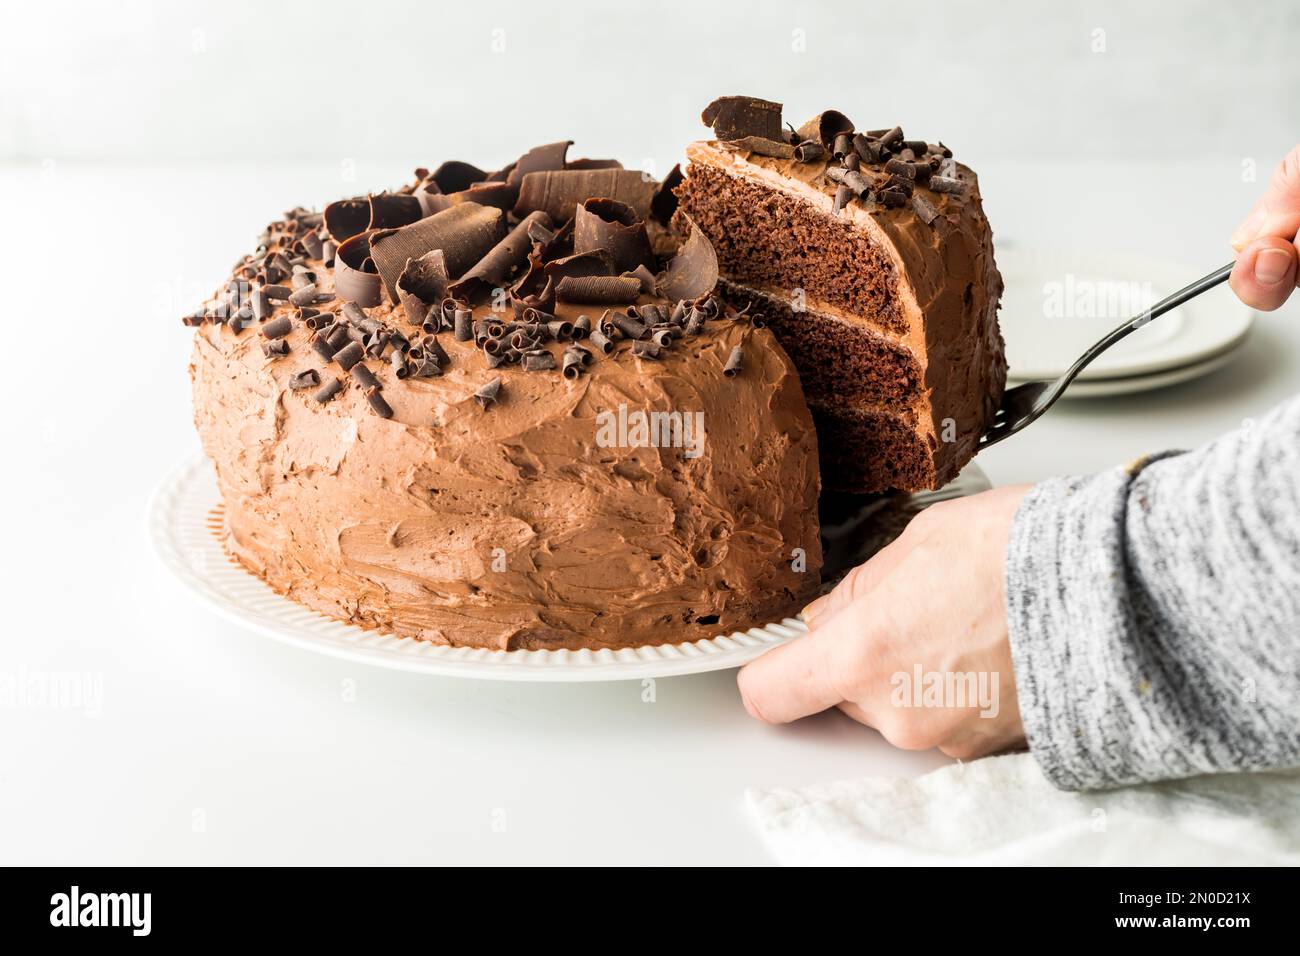 Hands removing a slice from a triple layered homemade chocolate cake. Stock Photo